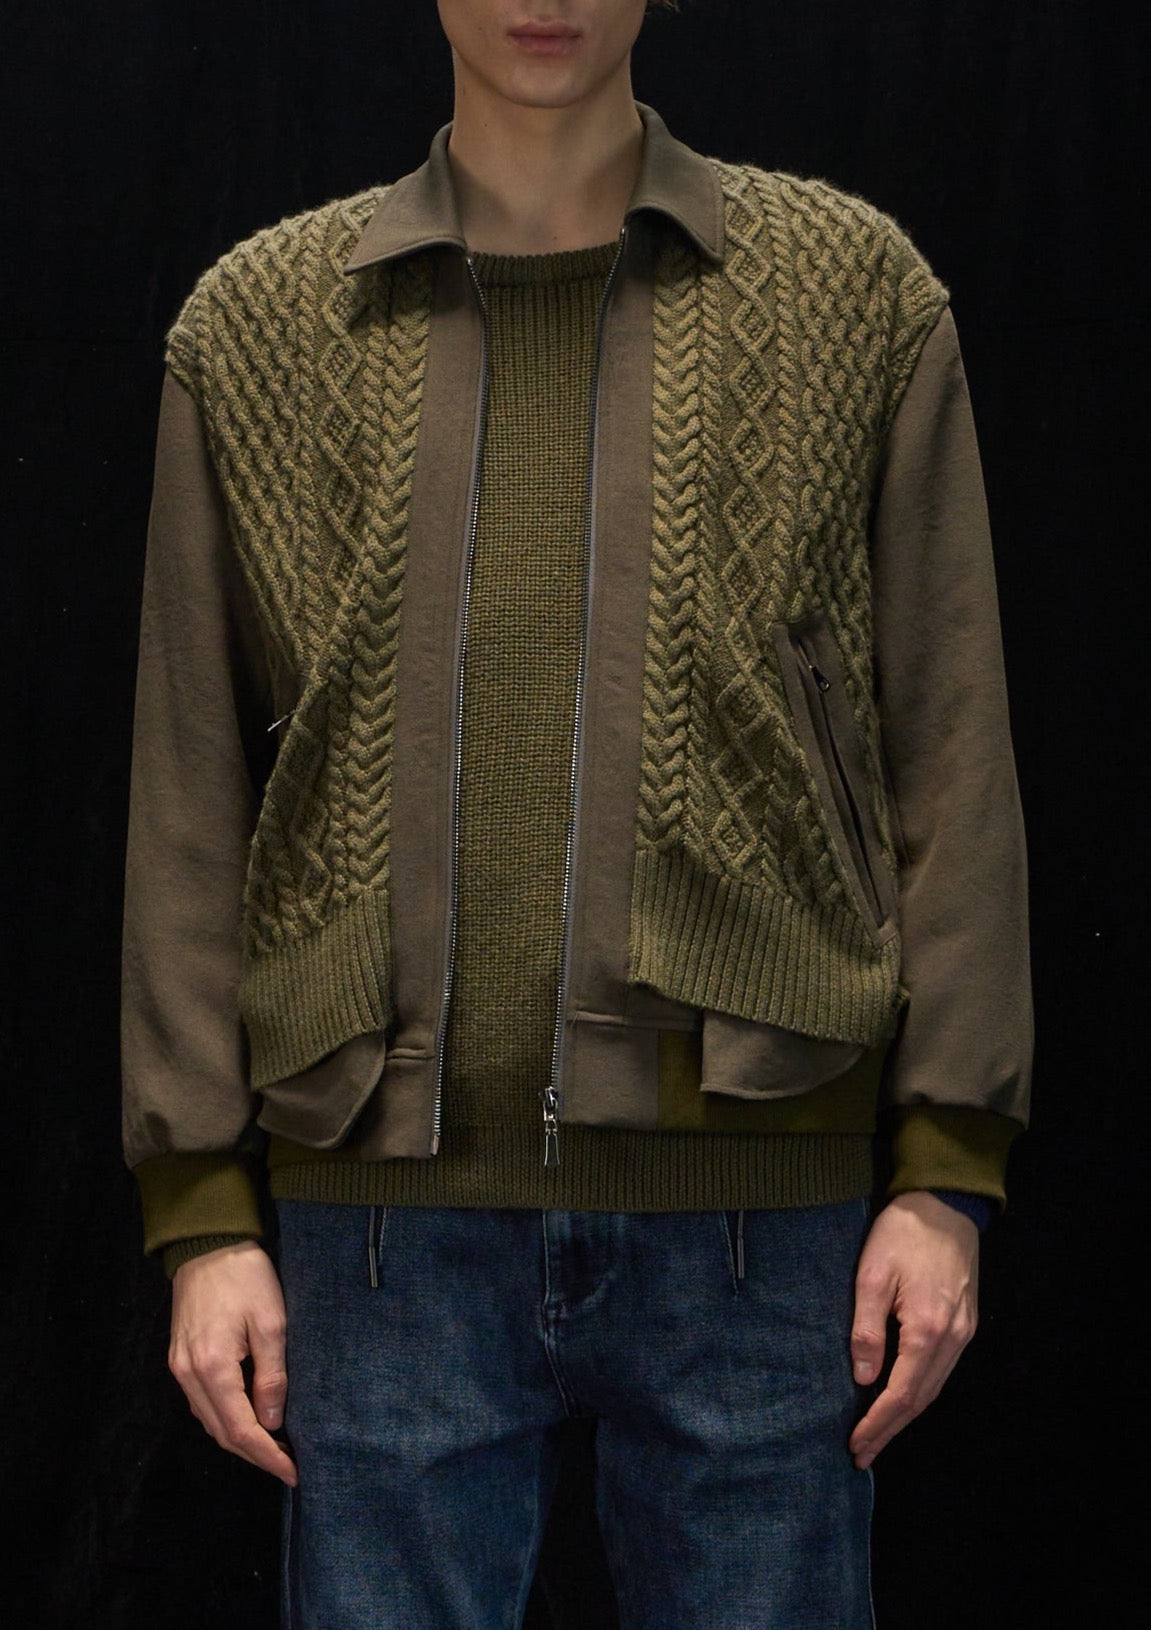 Harrison Wong Fabric and Knit Contrast Jacket